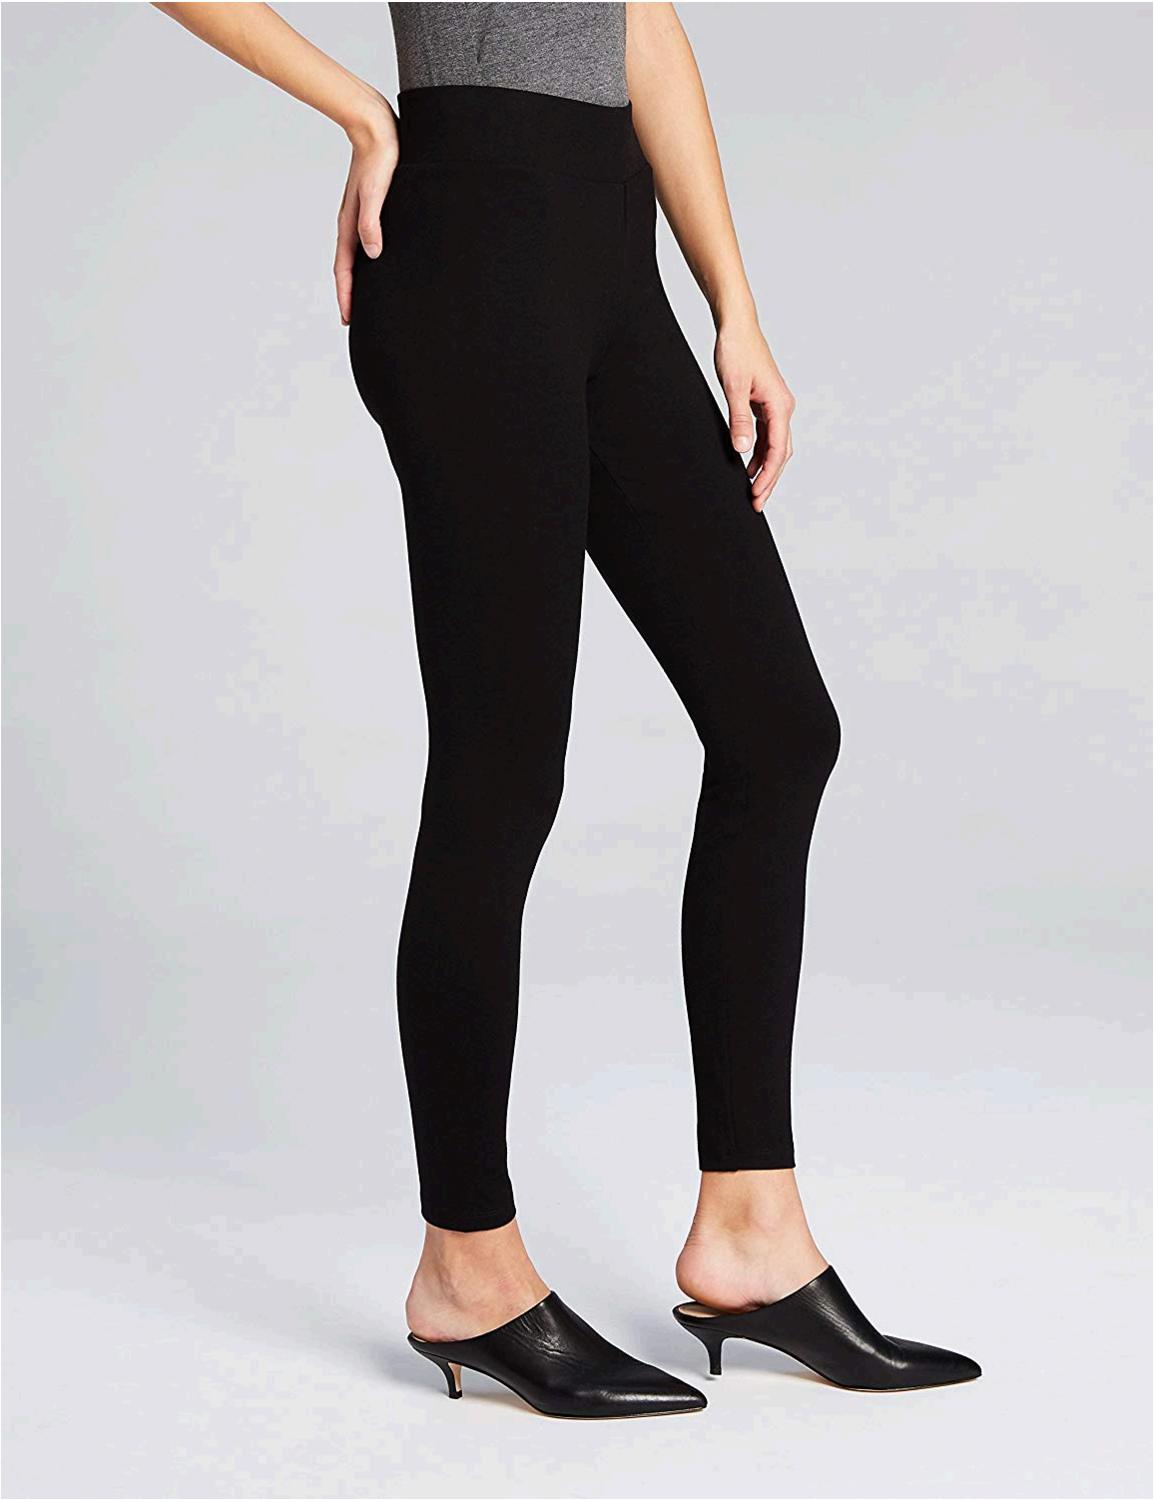 Conceited Premium Women's Stretch Ponte Pants - Dressy Leggings with Butt  Lift - Black - Small-Medium at  Women's Clothing store